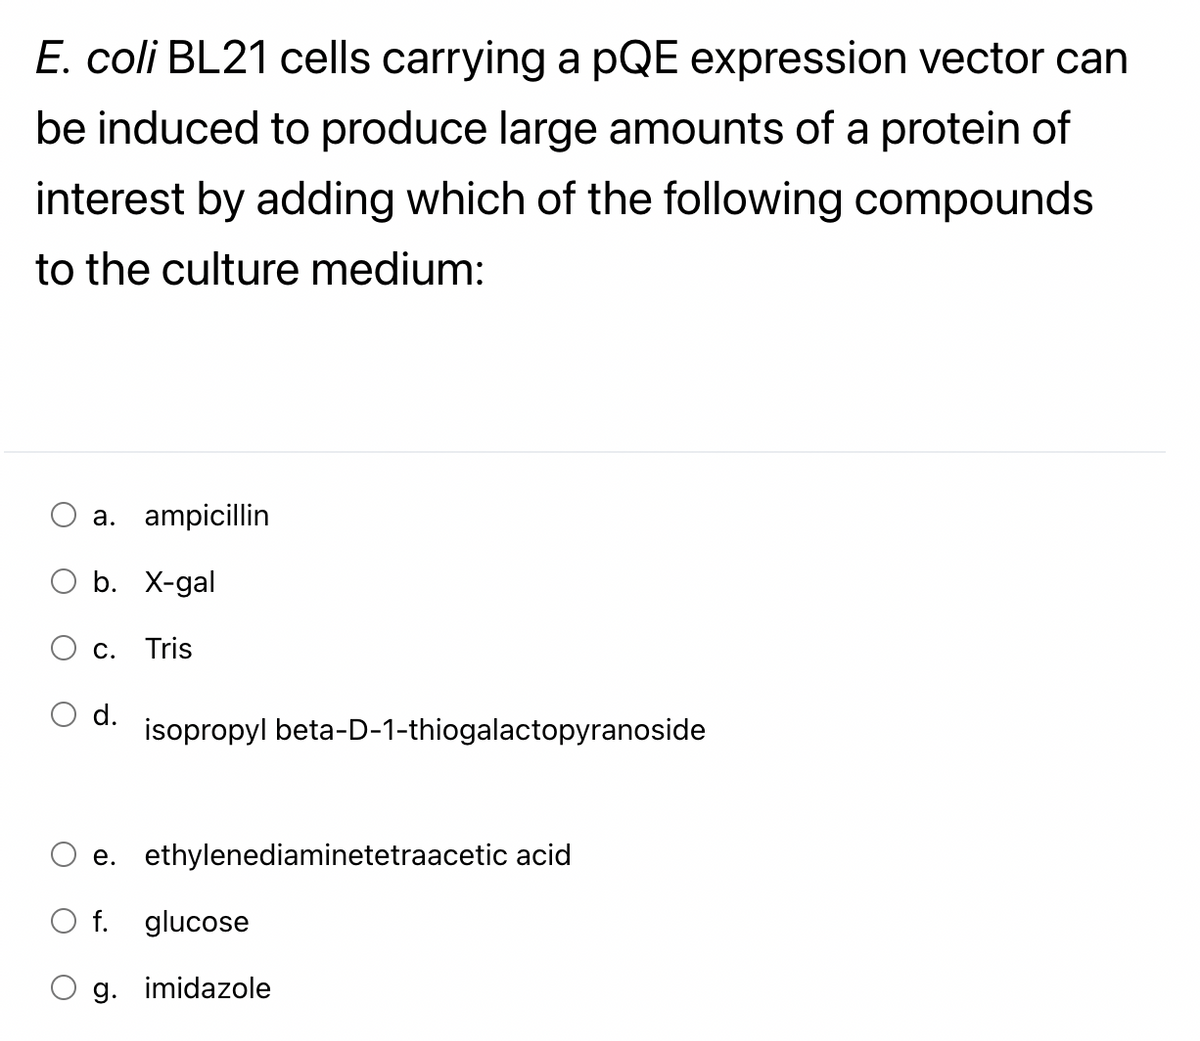 E. coli BL21 cells carrying a pQE expression vector can
be induced to produce large amounts of a protein of
interest by adding which of the following compounds
to the culture medium:
a. ampicillin
b. X-gal
Tris
C.
d.
isopropyl beta-D-1-thiogalactopyranoside
e. ethylenediaminetetraacetic acid
O f. glucose
g.
imidazole